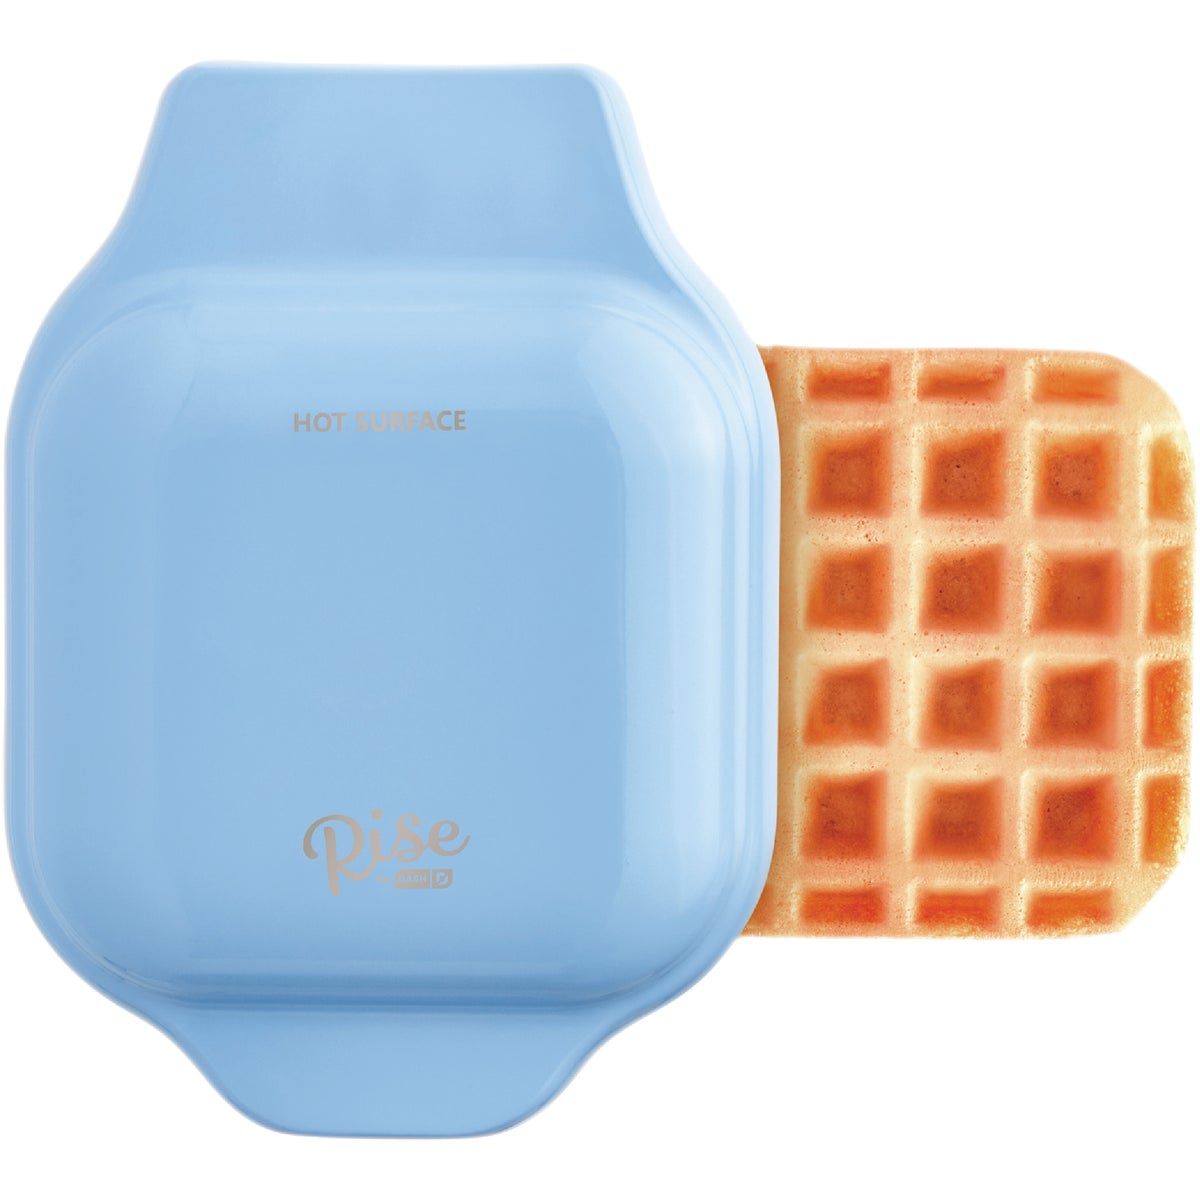 Rise by Dash 4 In. Light Blue Mini Waffle Maker